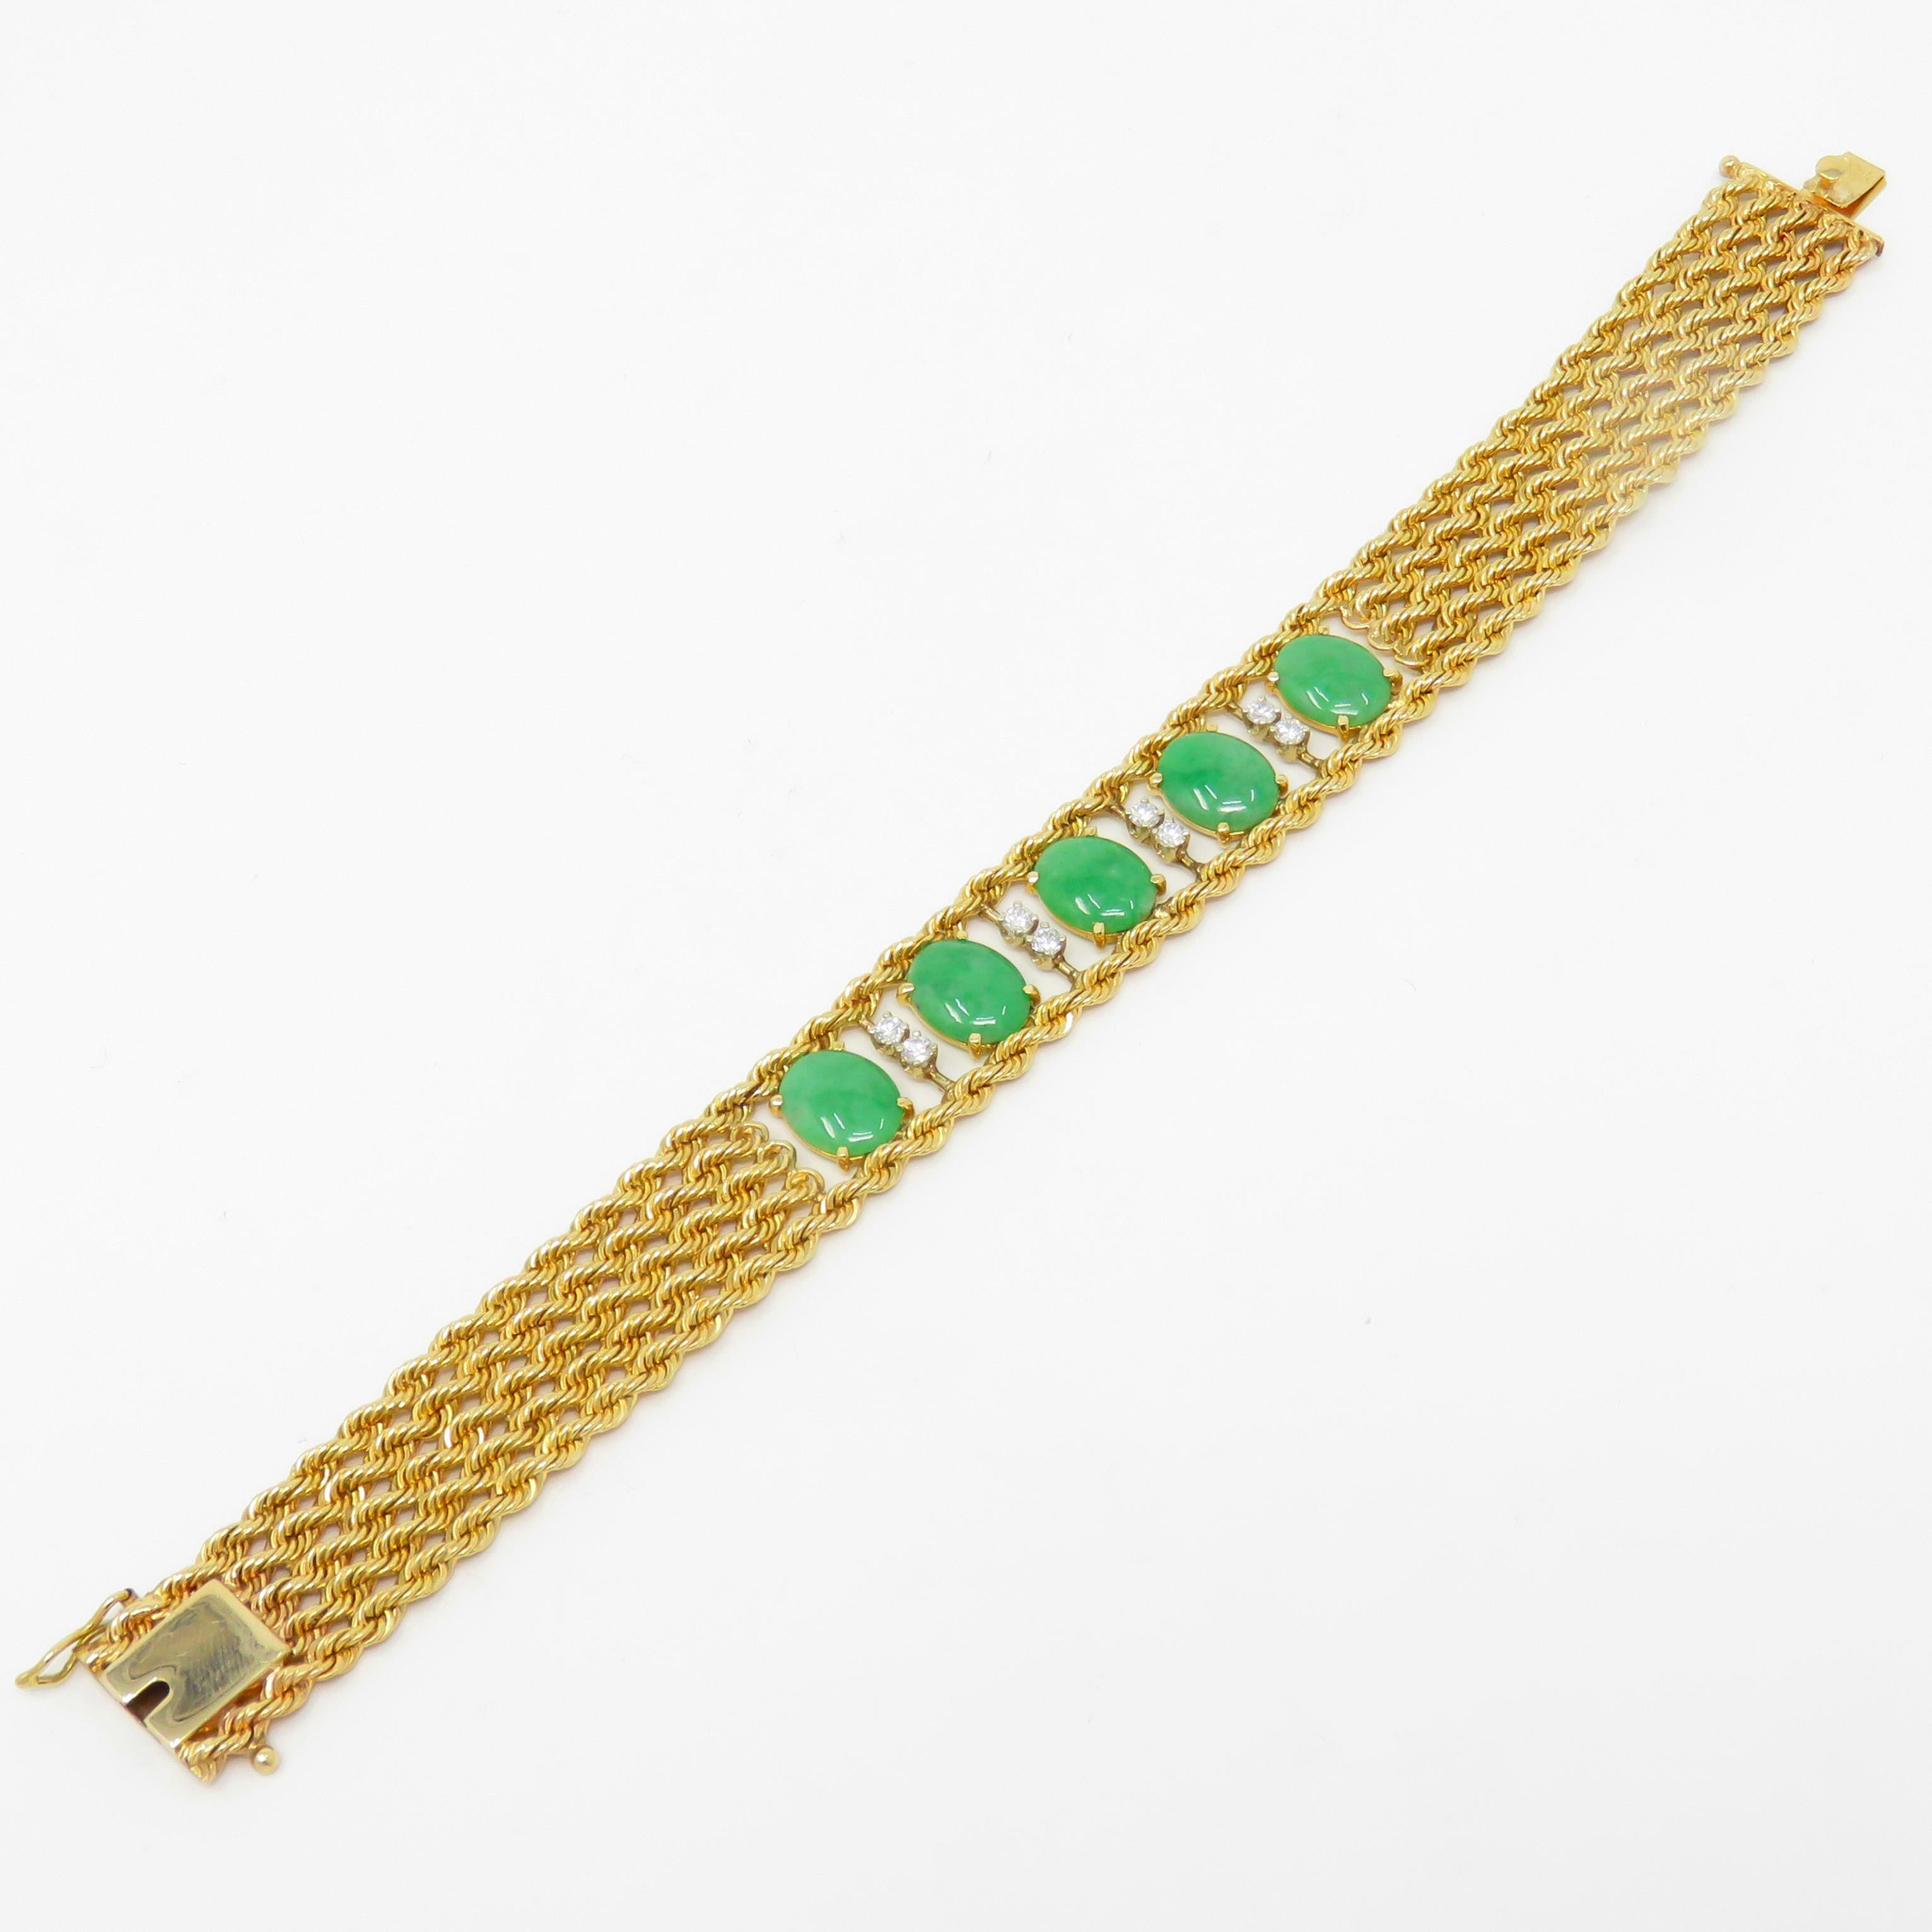 This stunning jade bracelet features five beautiful jade jadeite gemstones on a thick 14k gold bracelet also set with 8 natural tested diamonds, totaling approximately 0.50 carats, most in the G-H color range and VS clarity range.

The bracelet also